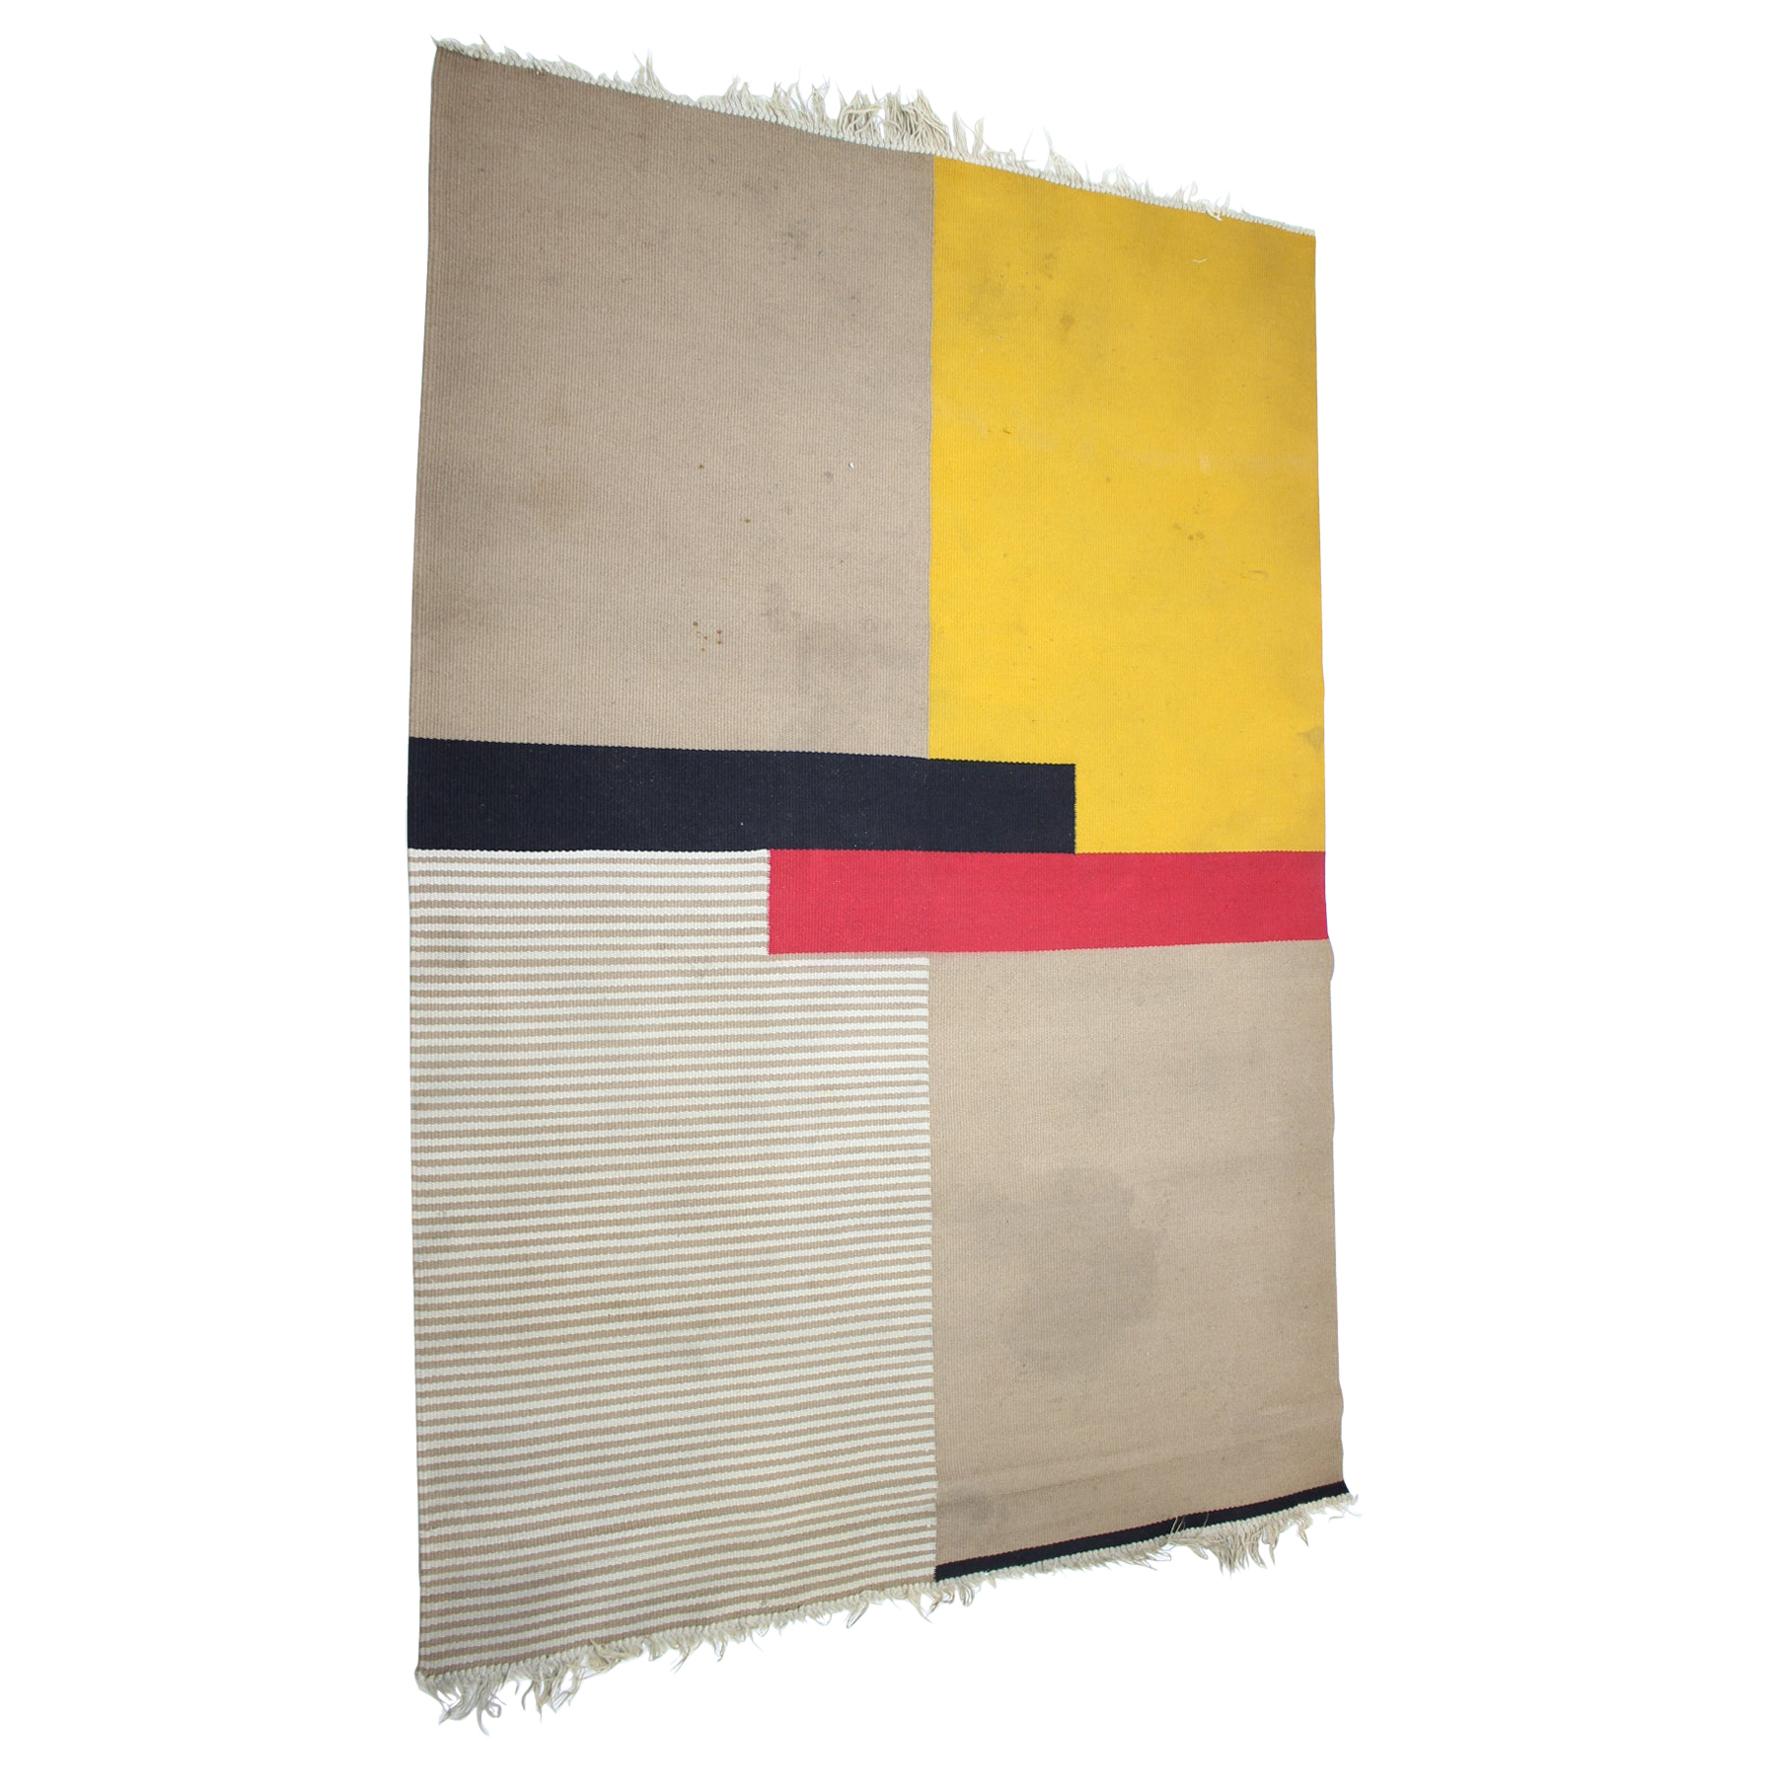 Pair of Big Midcentury Design Abstract Geometric Carpets, Rugs, 1950s